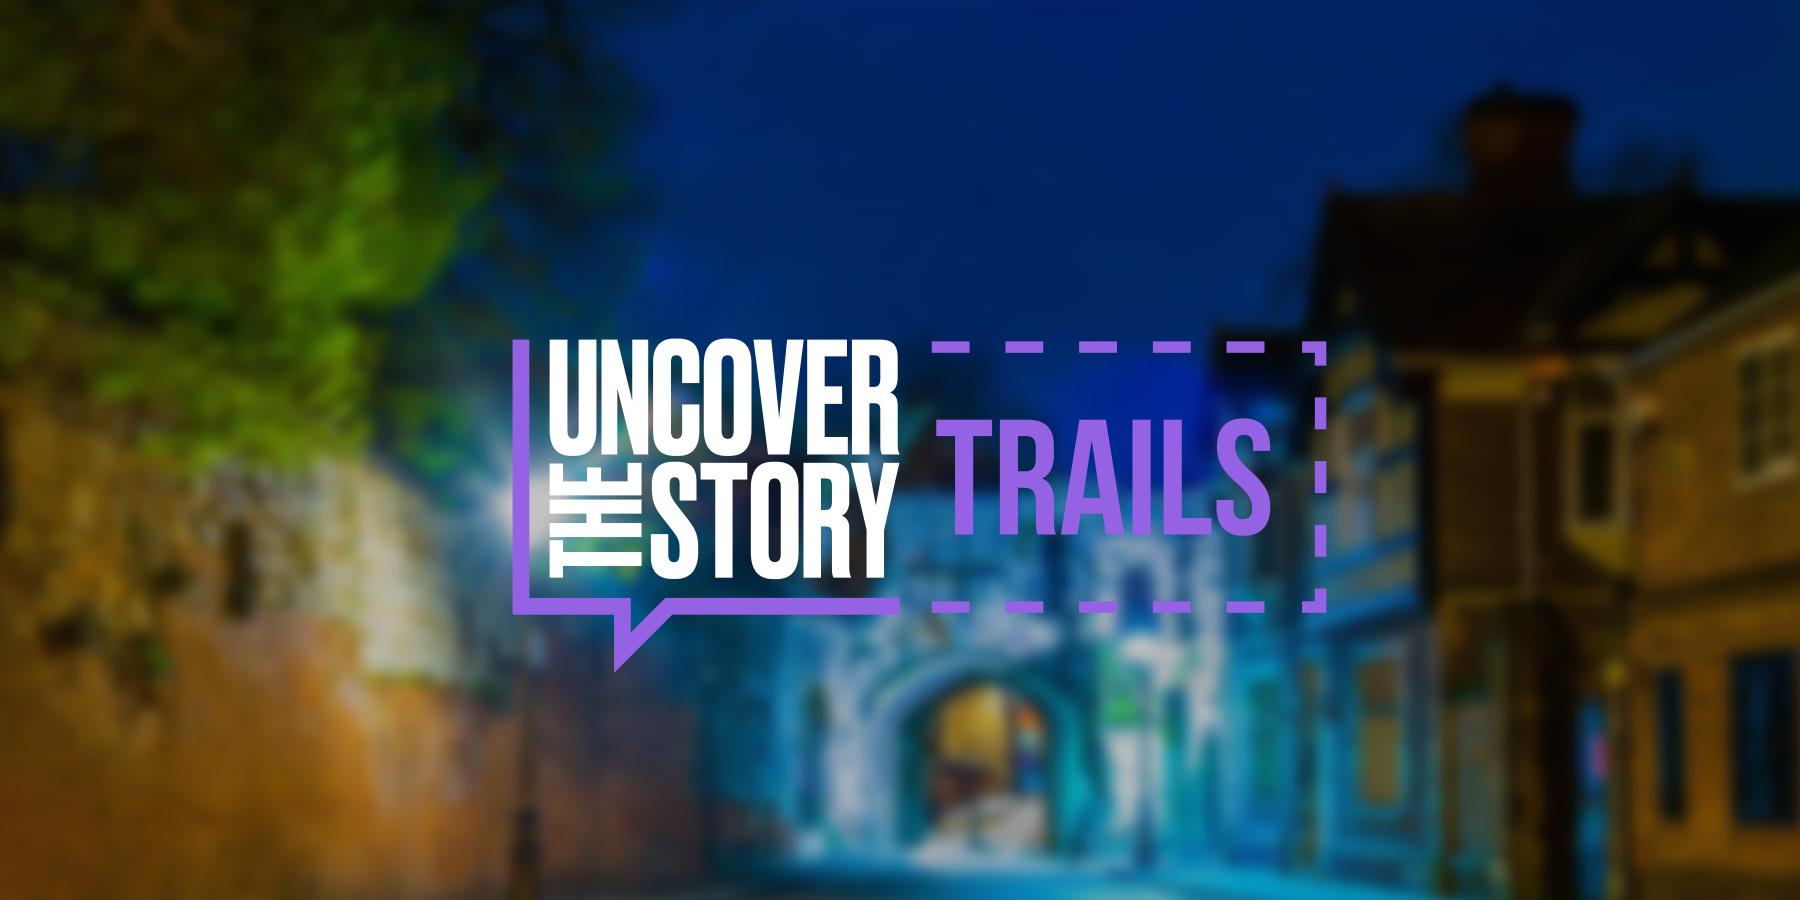 uncover the story trails